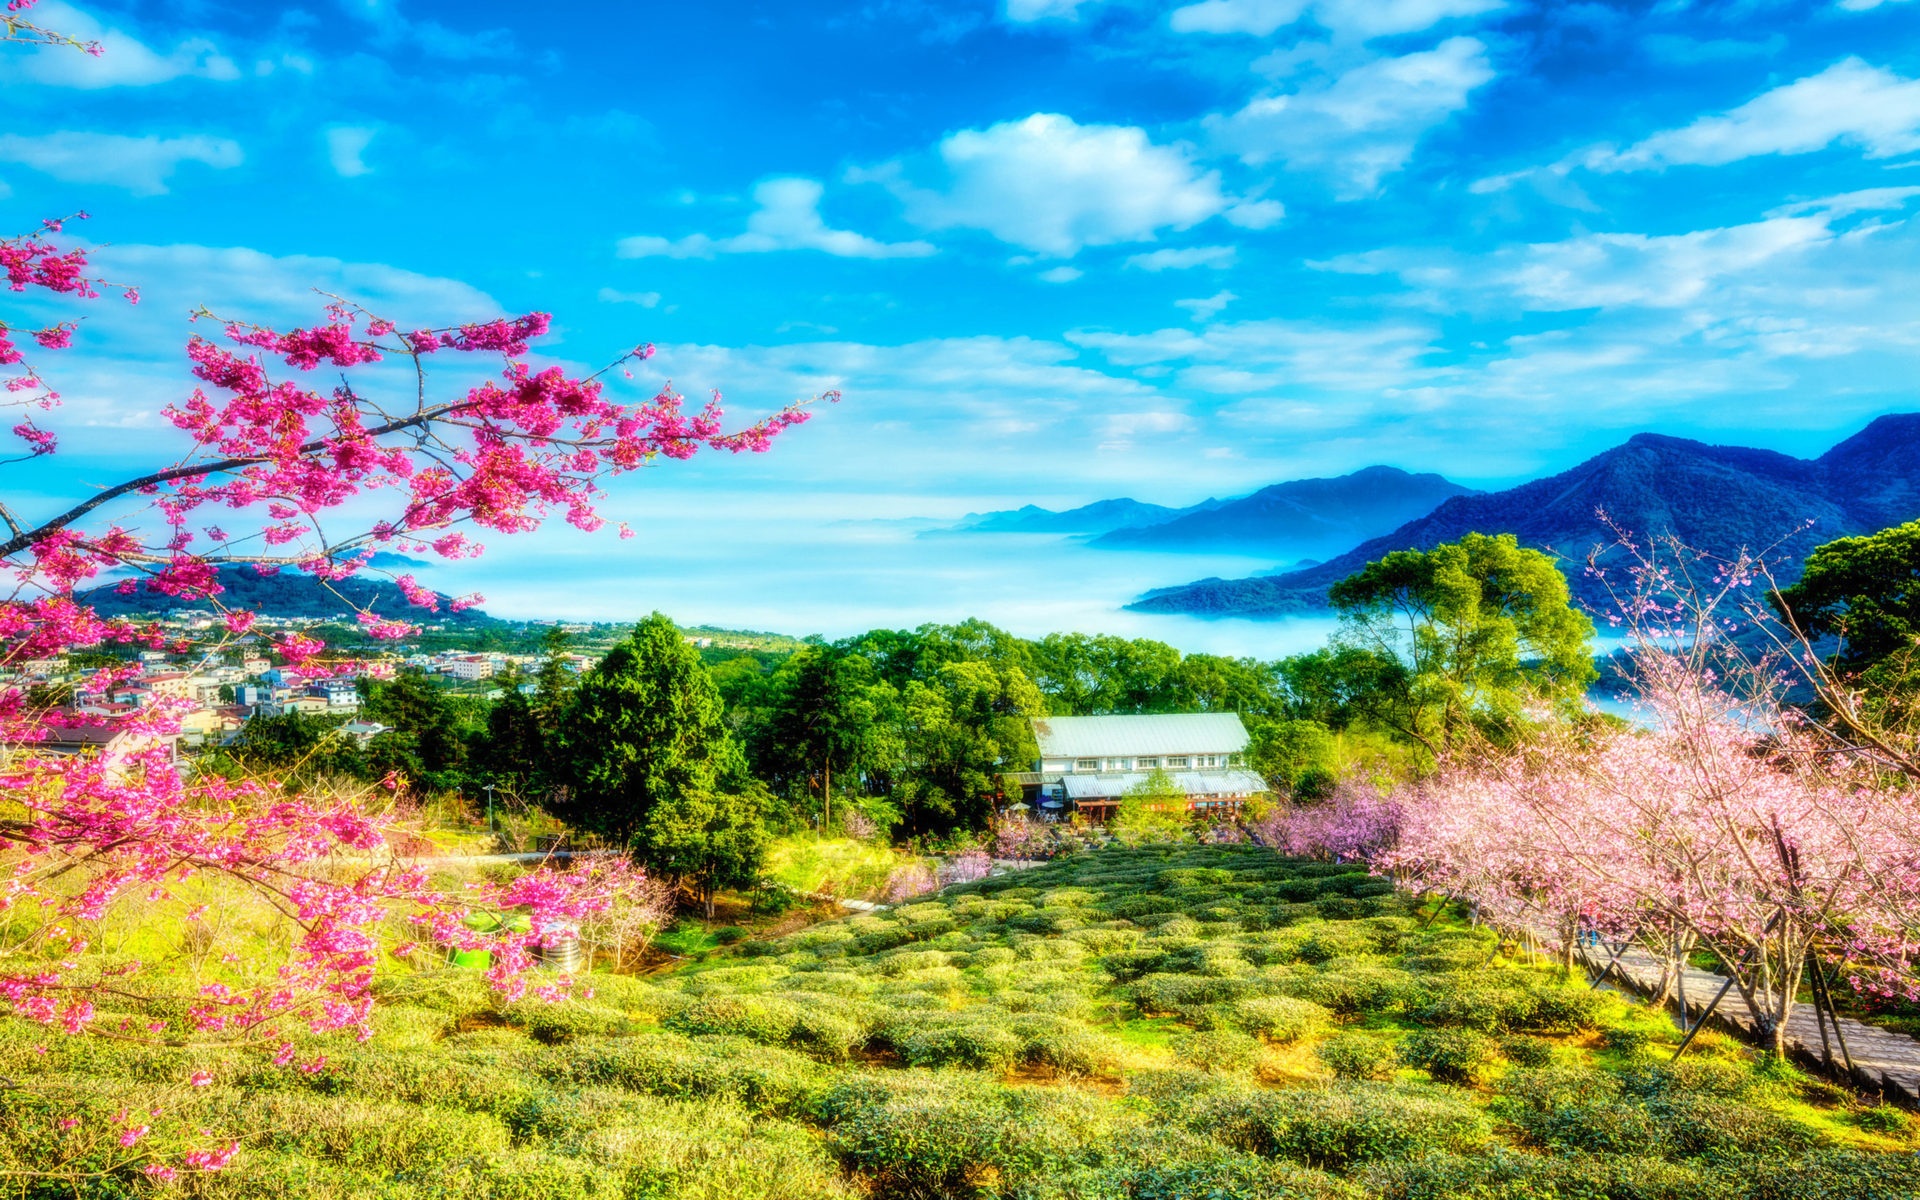 China Bloom On Cherry Spring Sky Clouds Trees Mountains Mountains Landscape Desktop Wallpaper HD 2560x1600, Wallpaper13.com